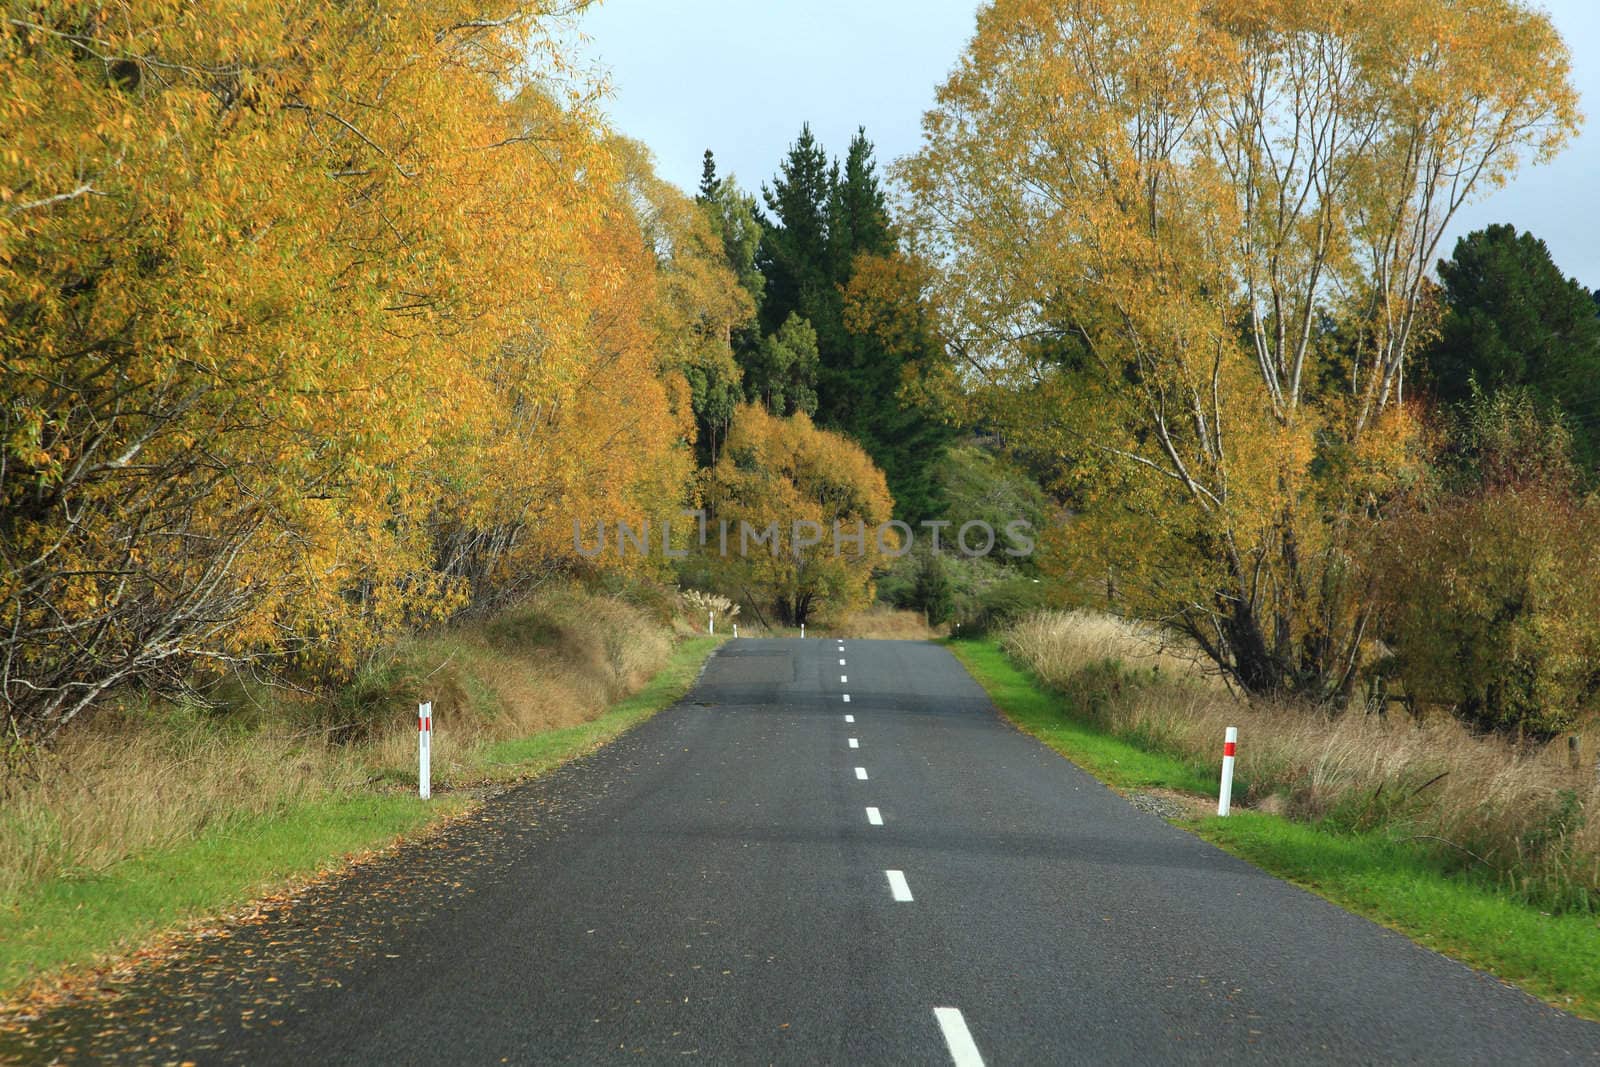 Long road stretching out into the distance with autumn tree in New Zealand